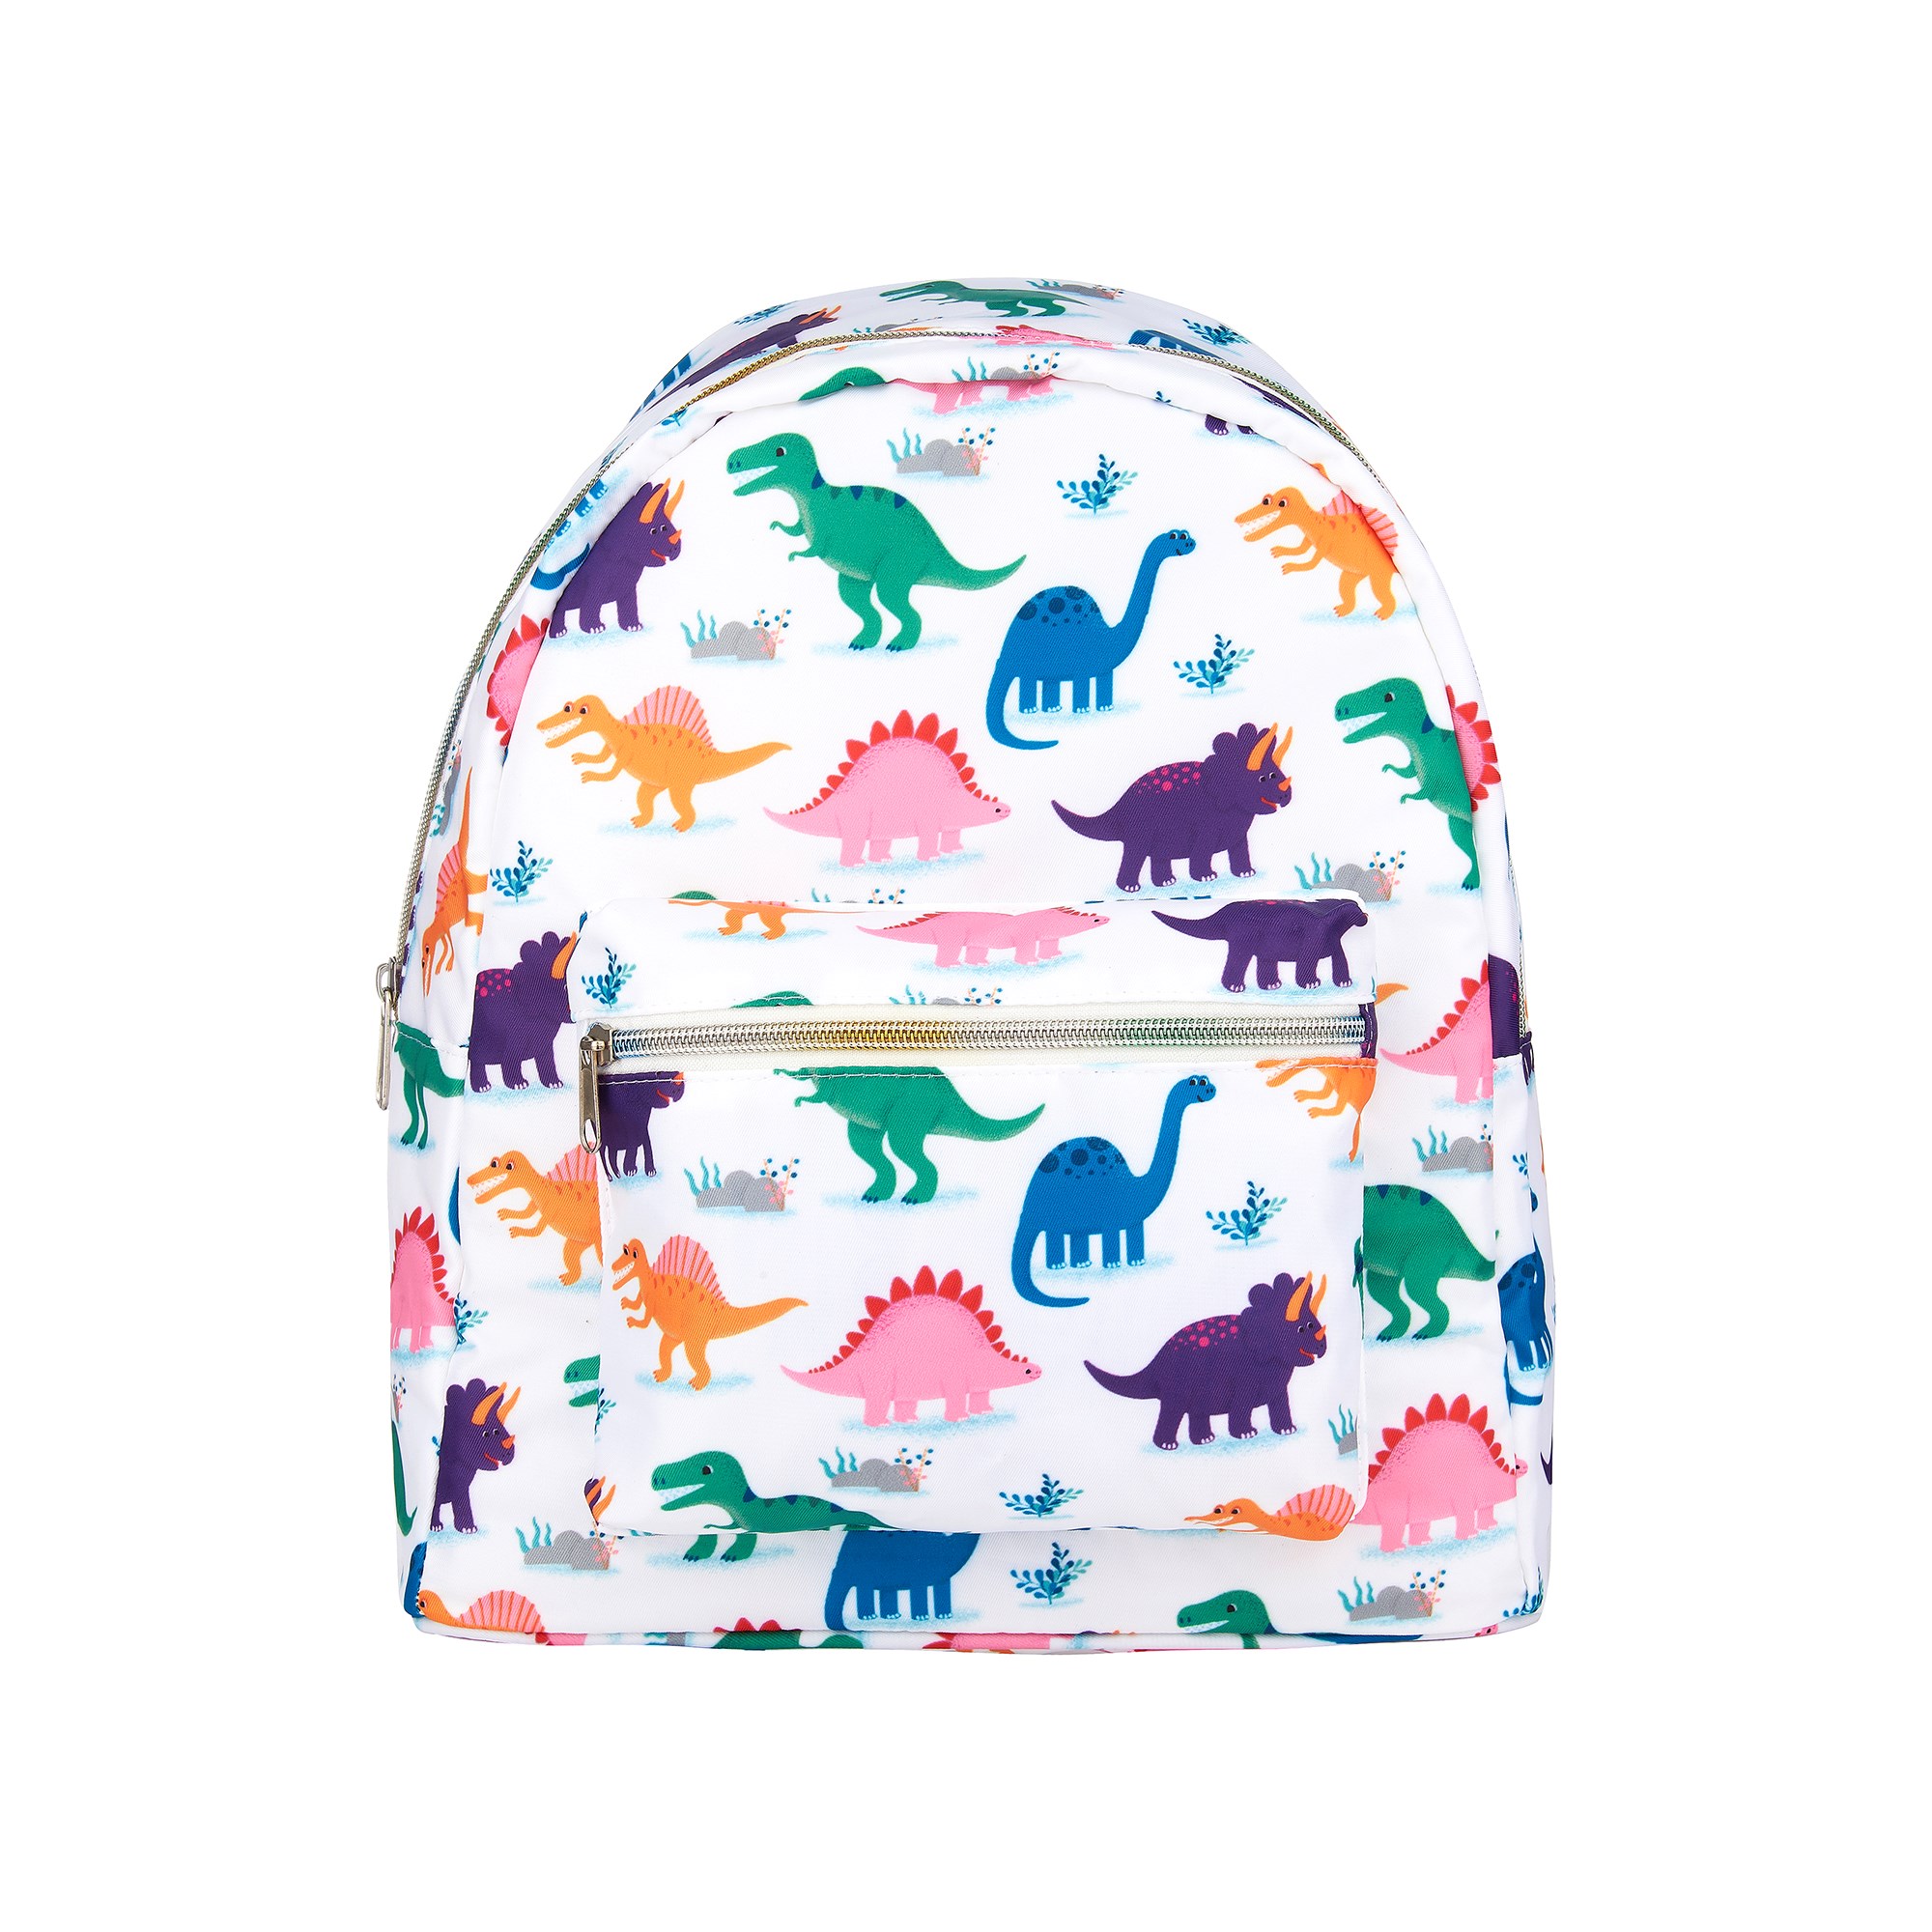 BAG002_A_Roarsome_Dinosaurs_Backpack